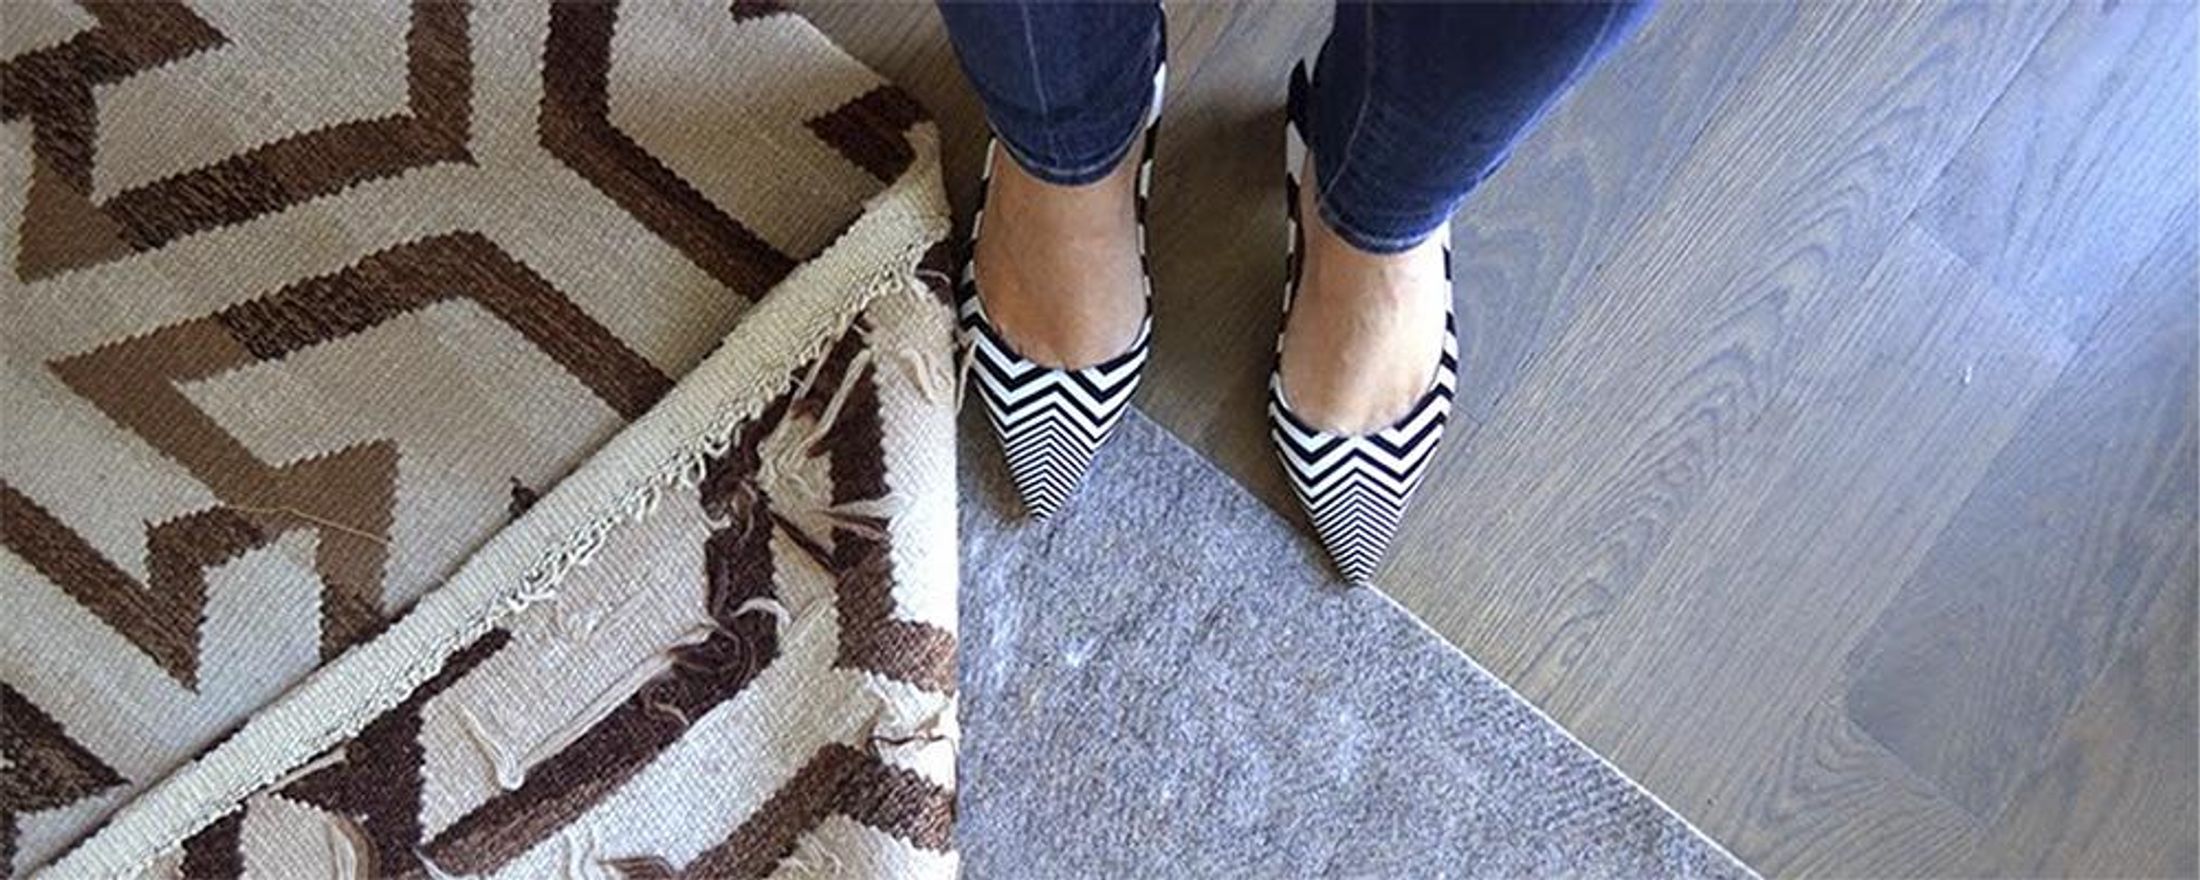 How to Secure Area Rug on Top of Carpet (So it Won't Bunch) - RugPadUSA